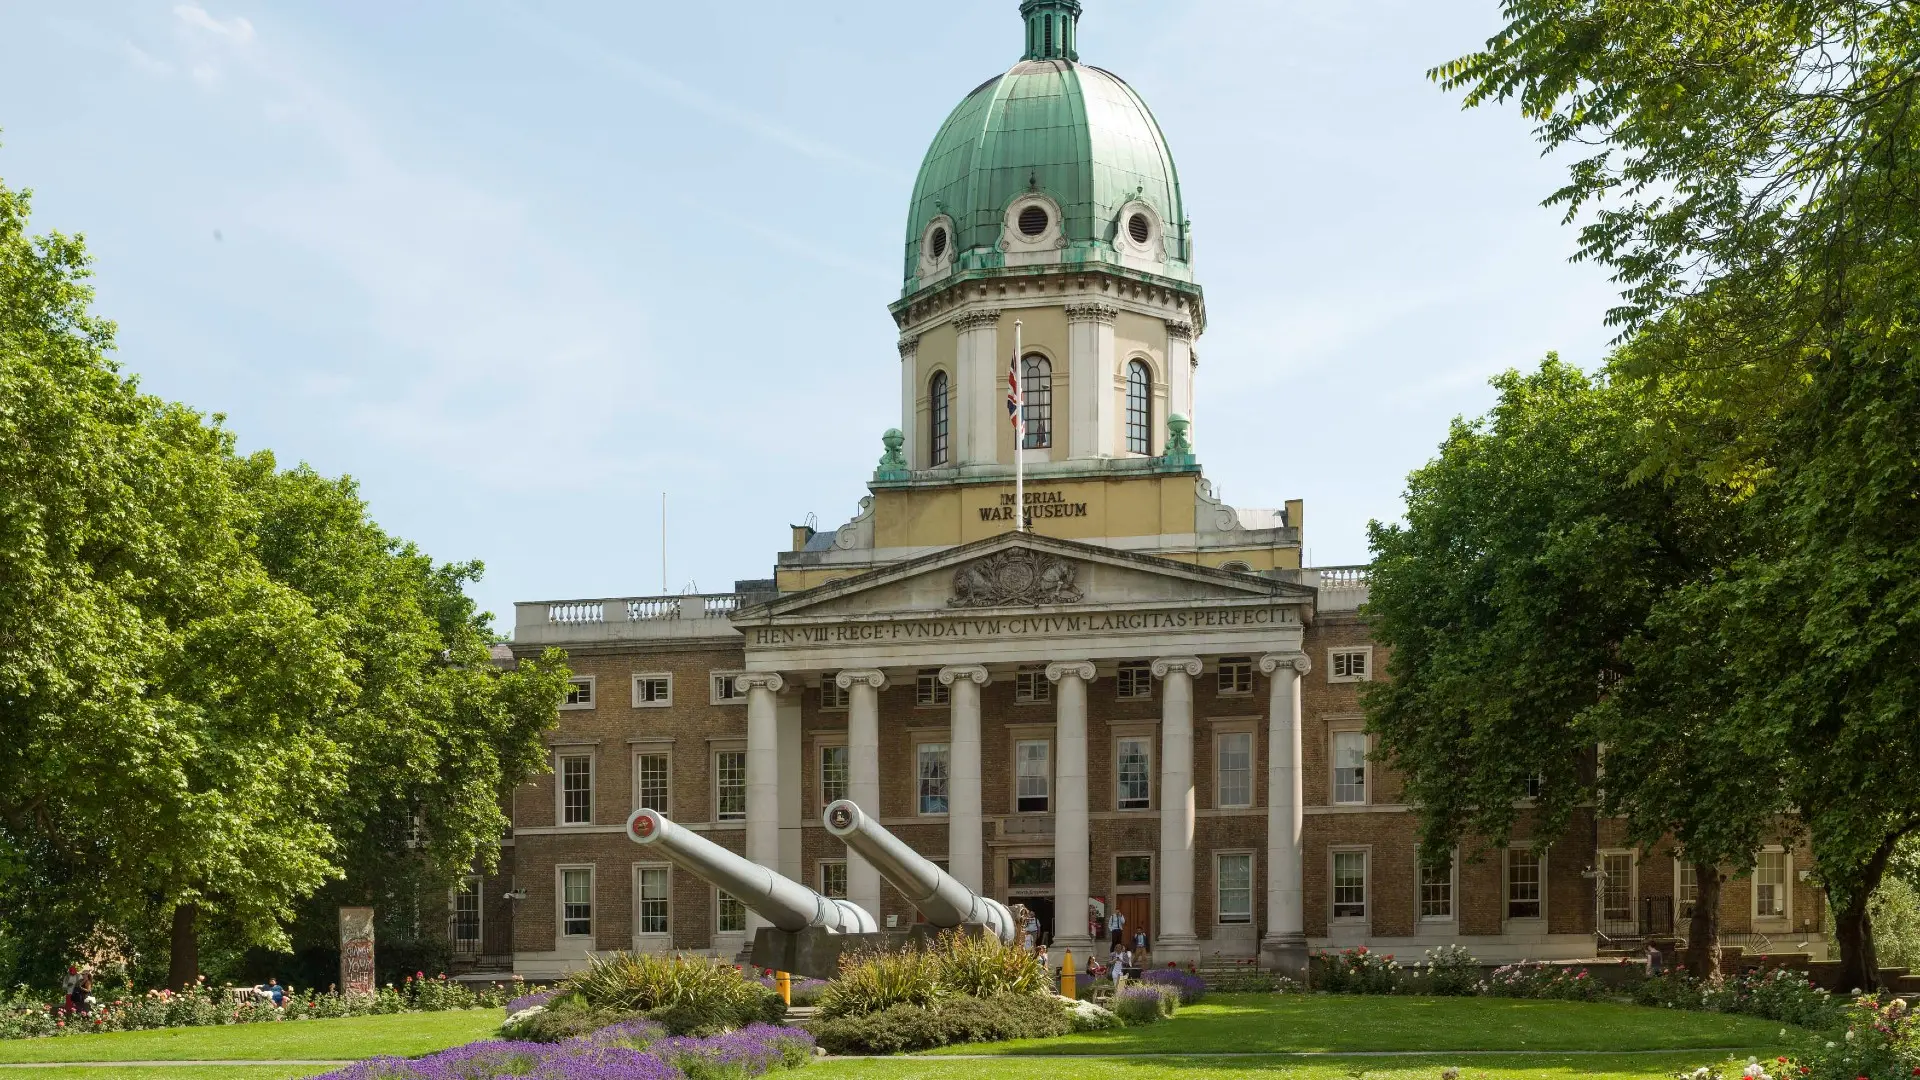 5. Imperial War Museum, one of the best art exhibitions in london